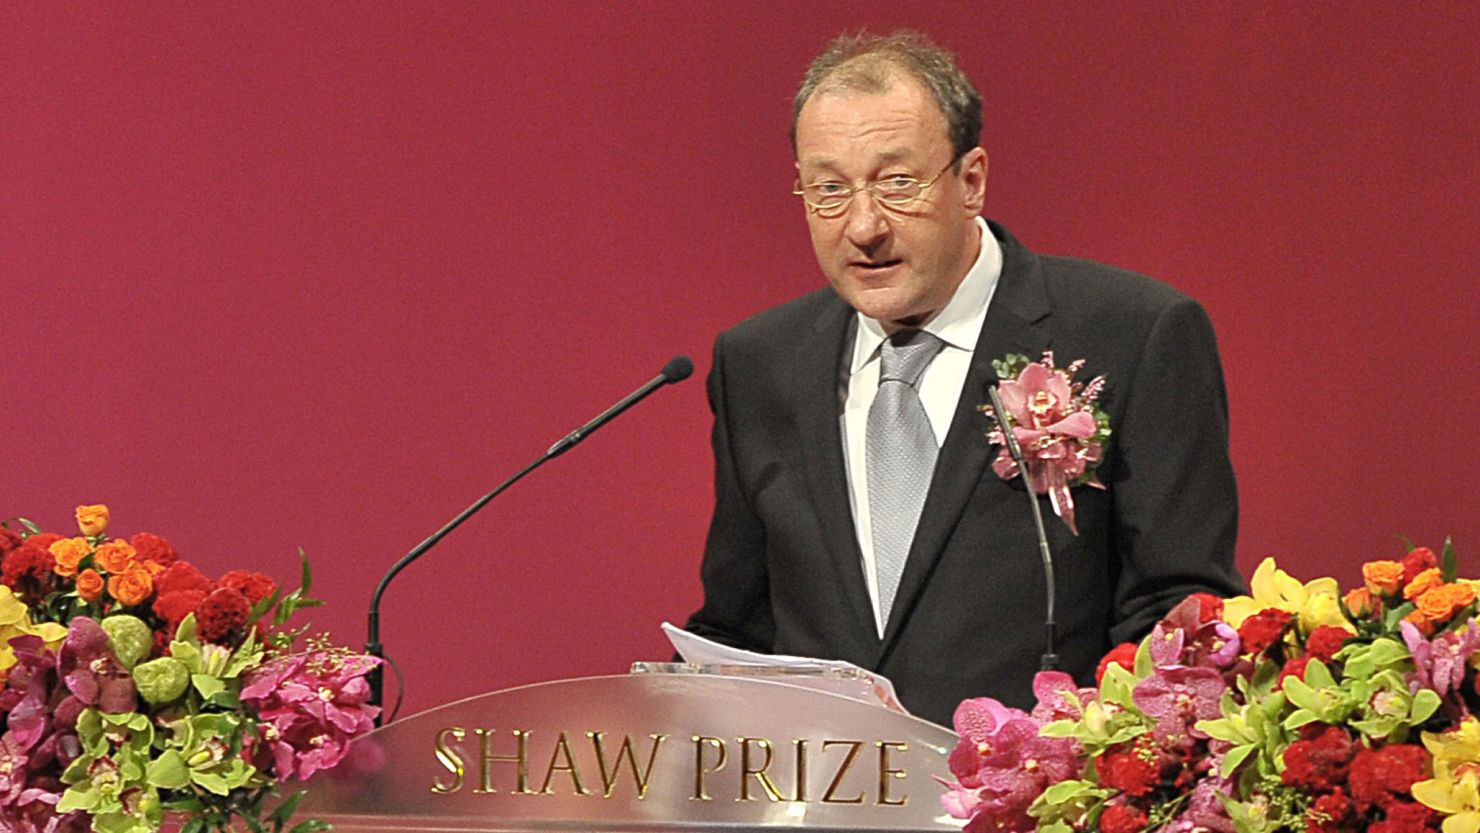 In this file picture taken on September 9, 2008, British scientist Keith Campbell speaks at the Shaw Prize award presentation ceremony in Hong Kong.